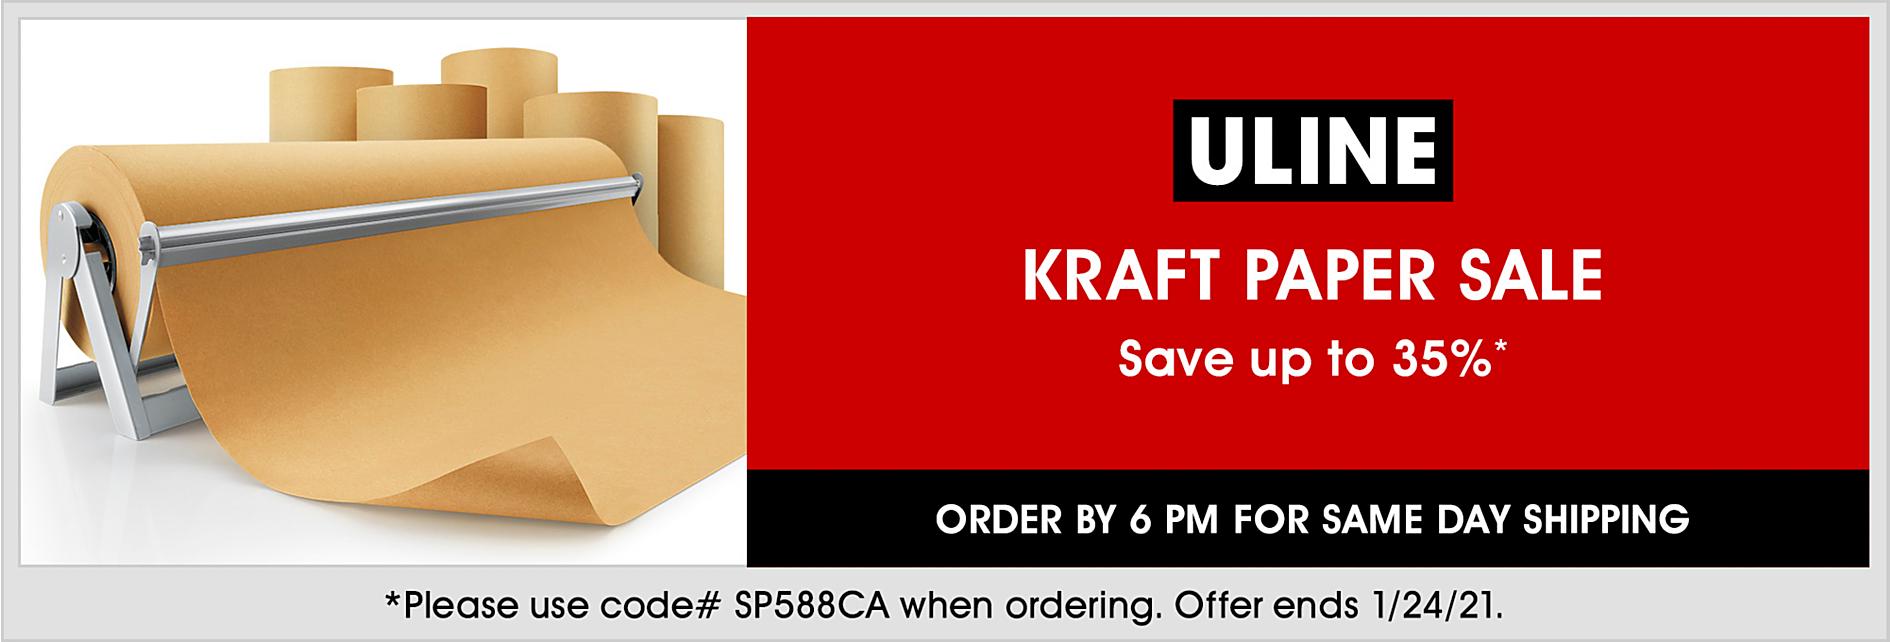 SP588CA Kraft Paper Sale, Save up to 35%, Use code SP588CA, Offer ends 1/24/21